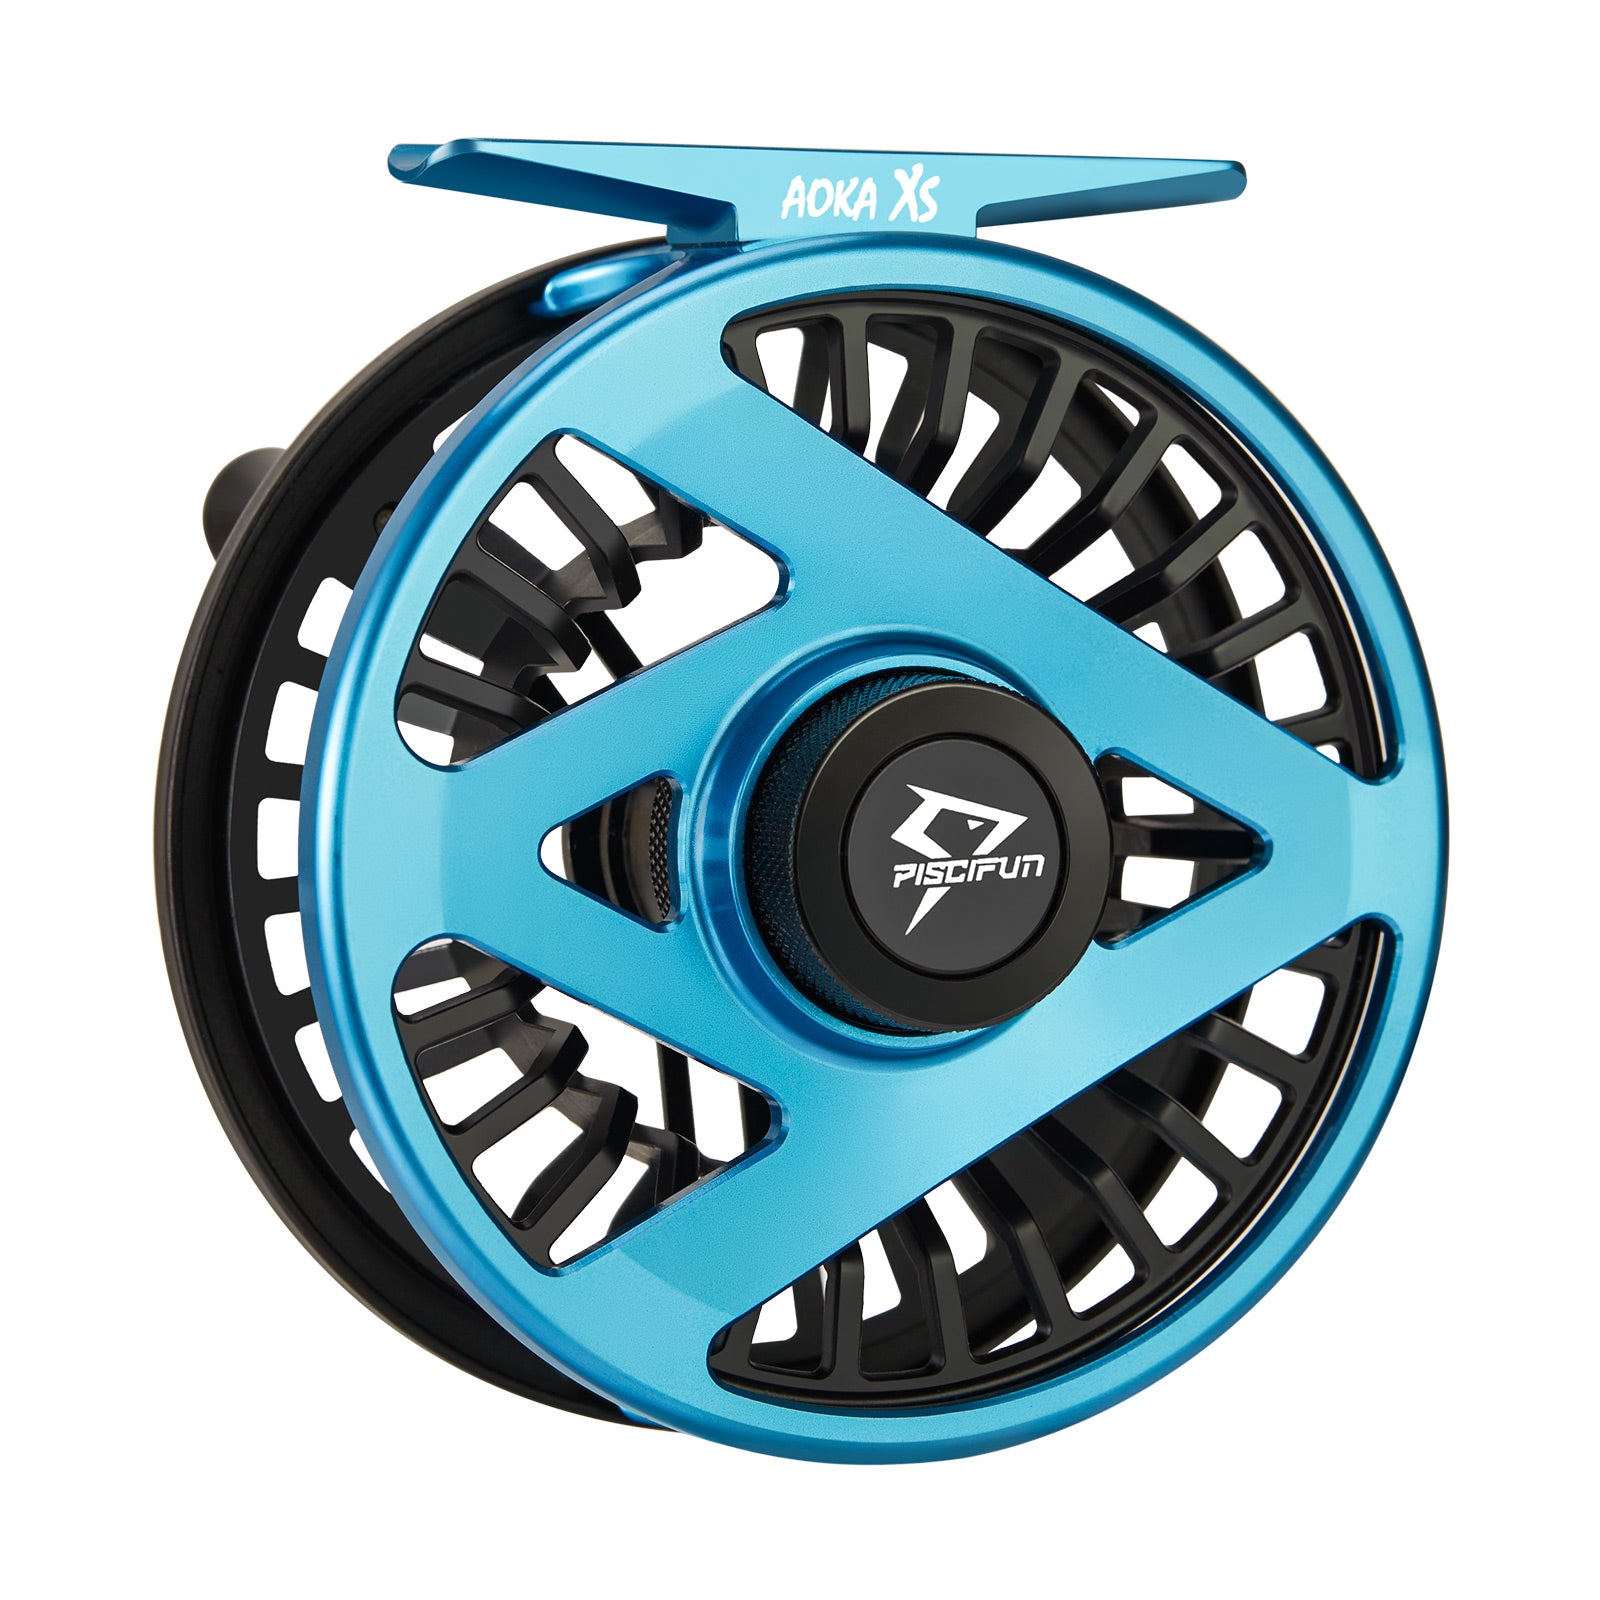 Piscifun® Aoka XS Fly Fishing Reel with Sealed Drag, CNC-machined Aluminum  Alloy Body Fly Reel, Black & Blue / 9/10WT